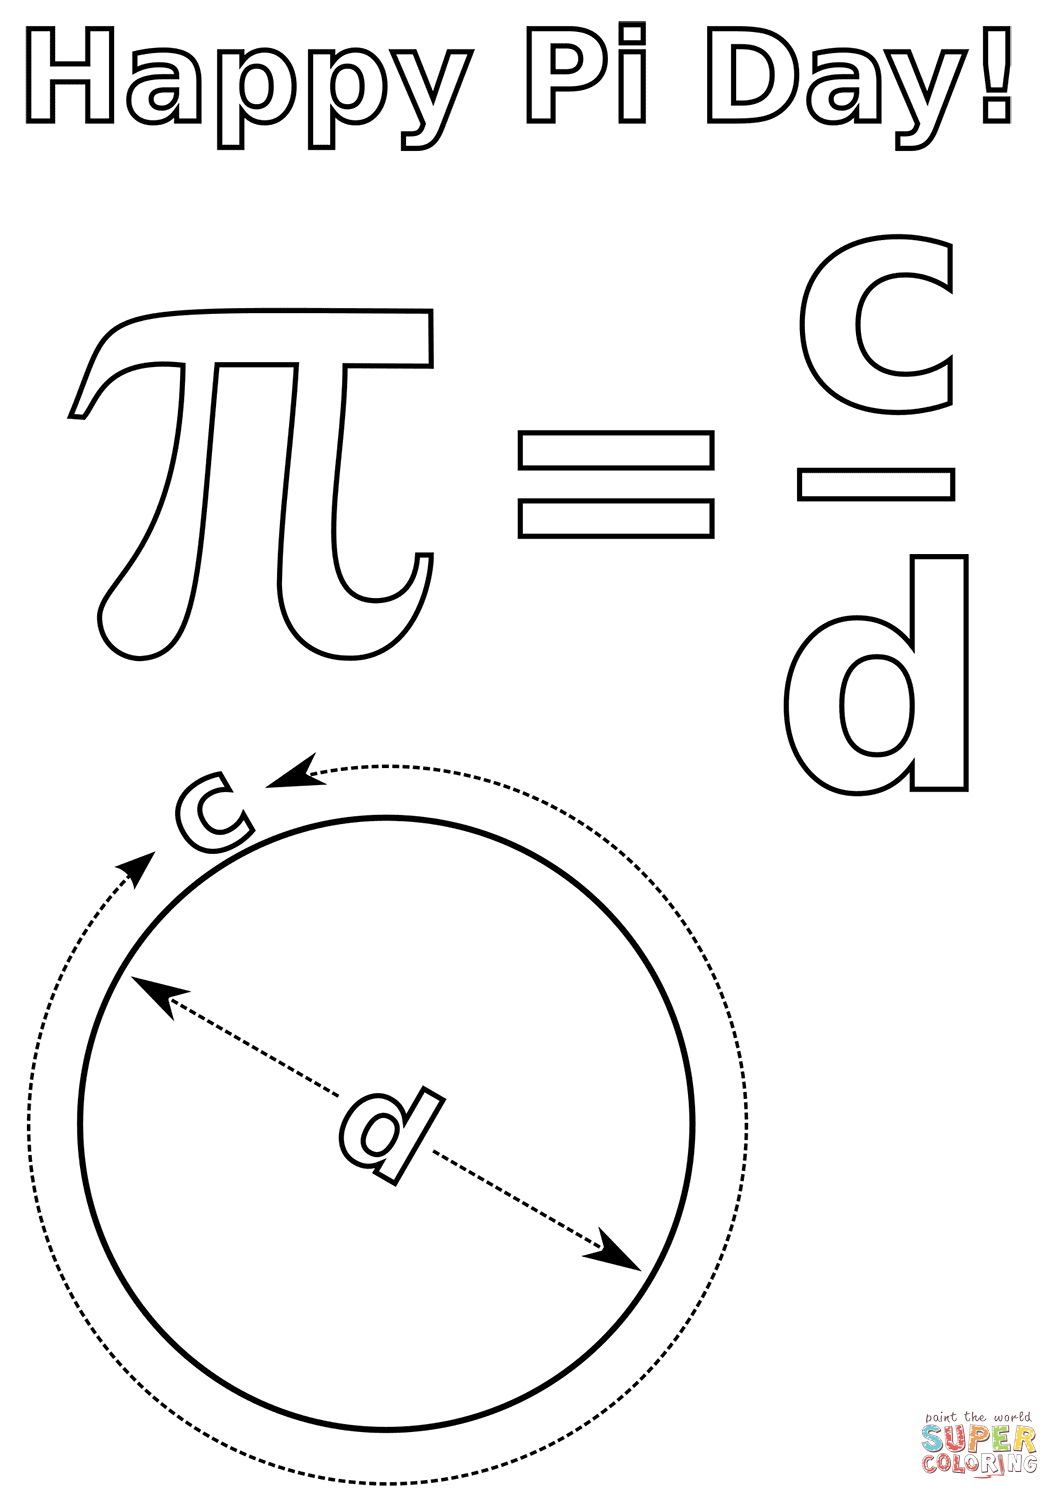 Happy pi day coloring page free printable coloring pages